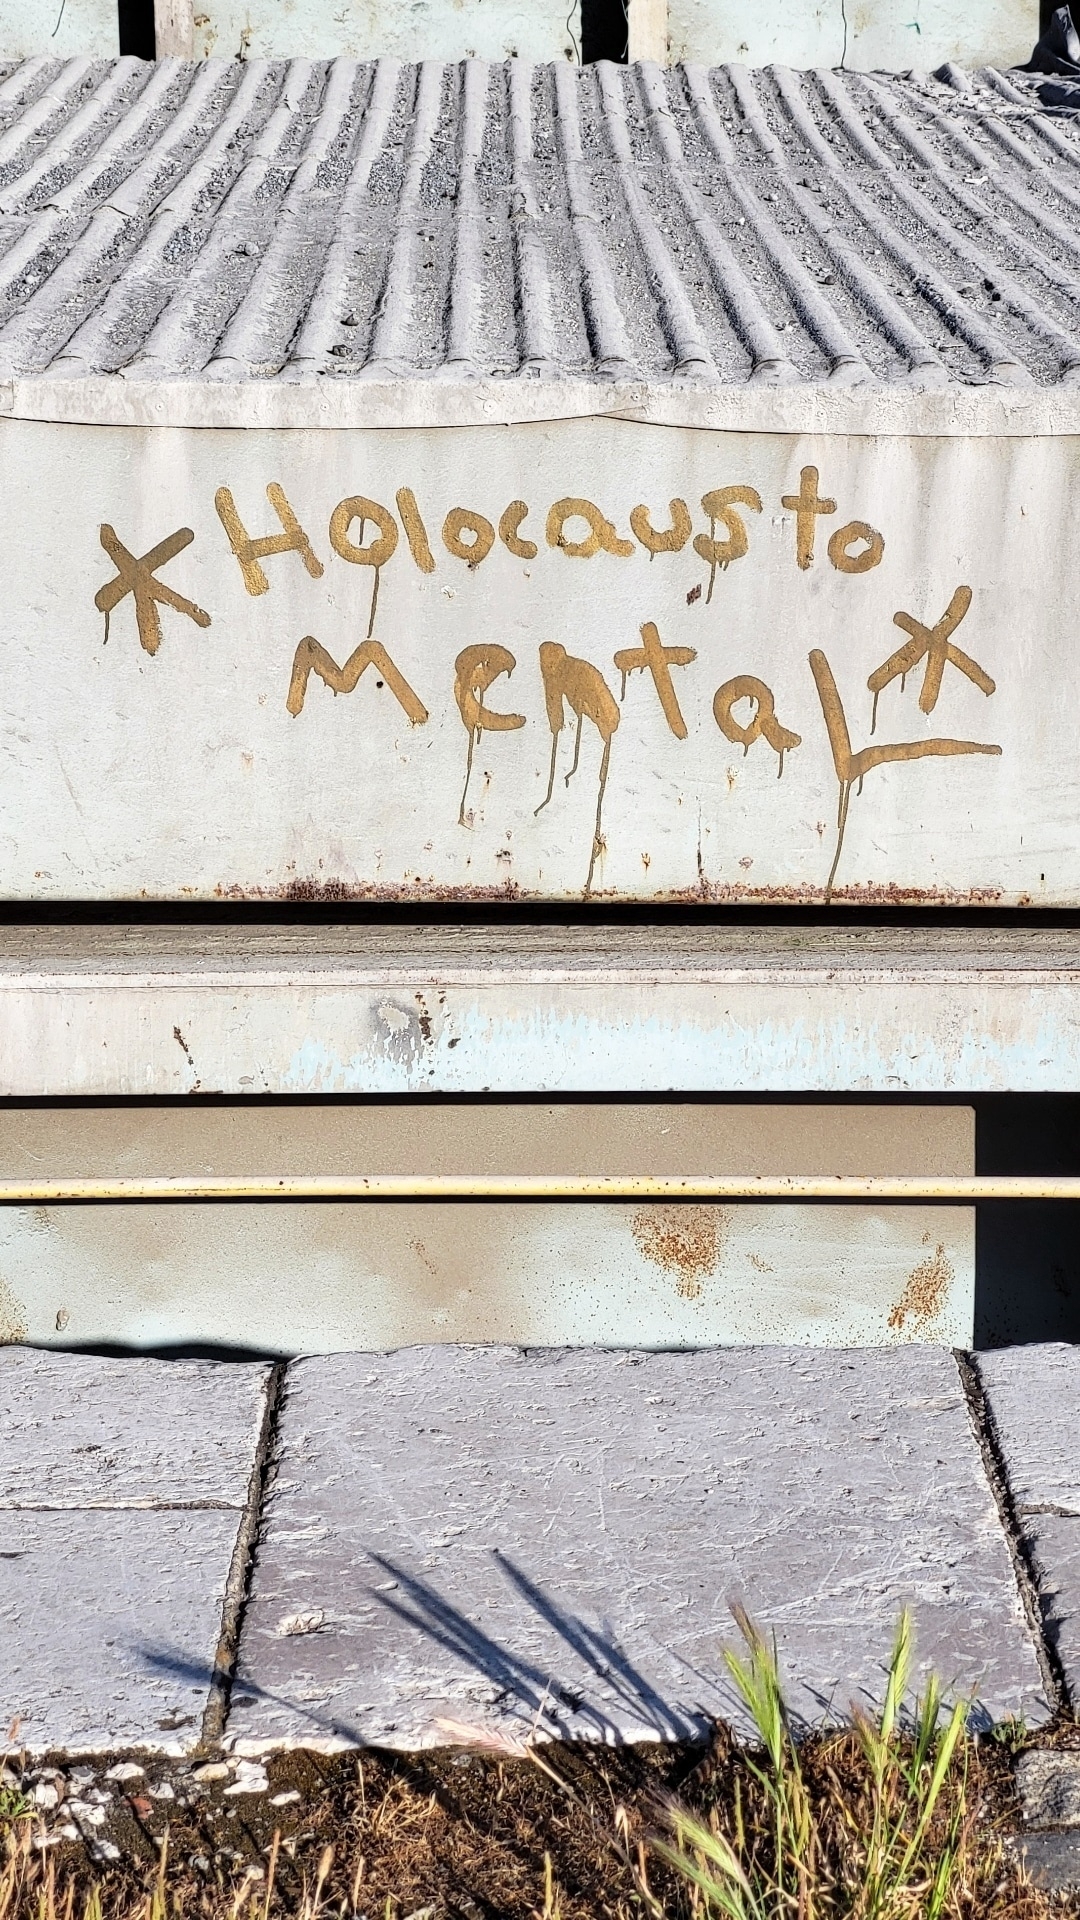 "holocausto mental" painted on a ship 